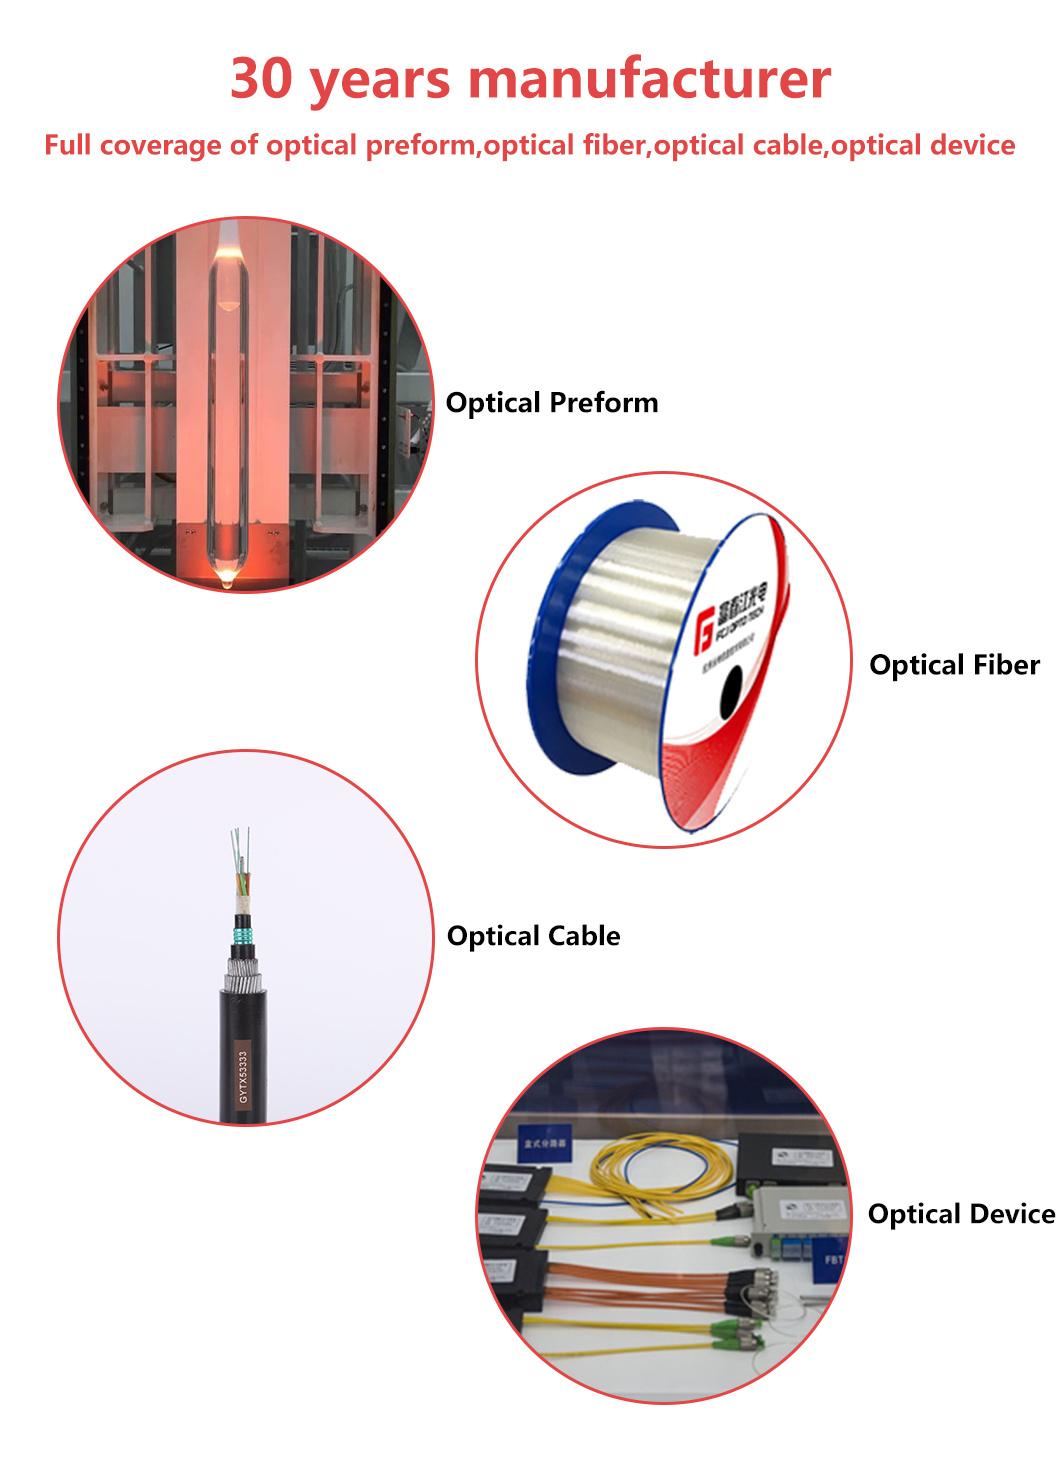 MTP/MPO-LC Jumper for Fiber Optic Connectorized Components